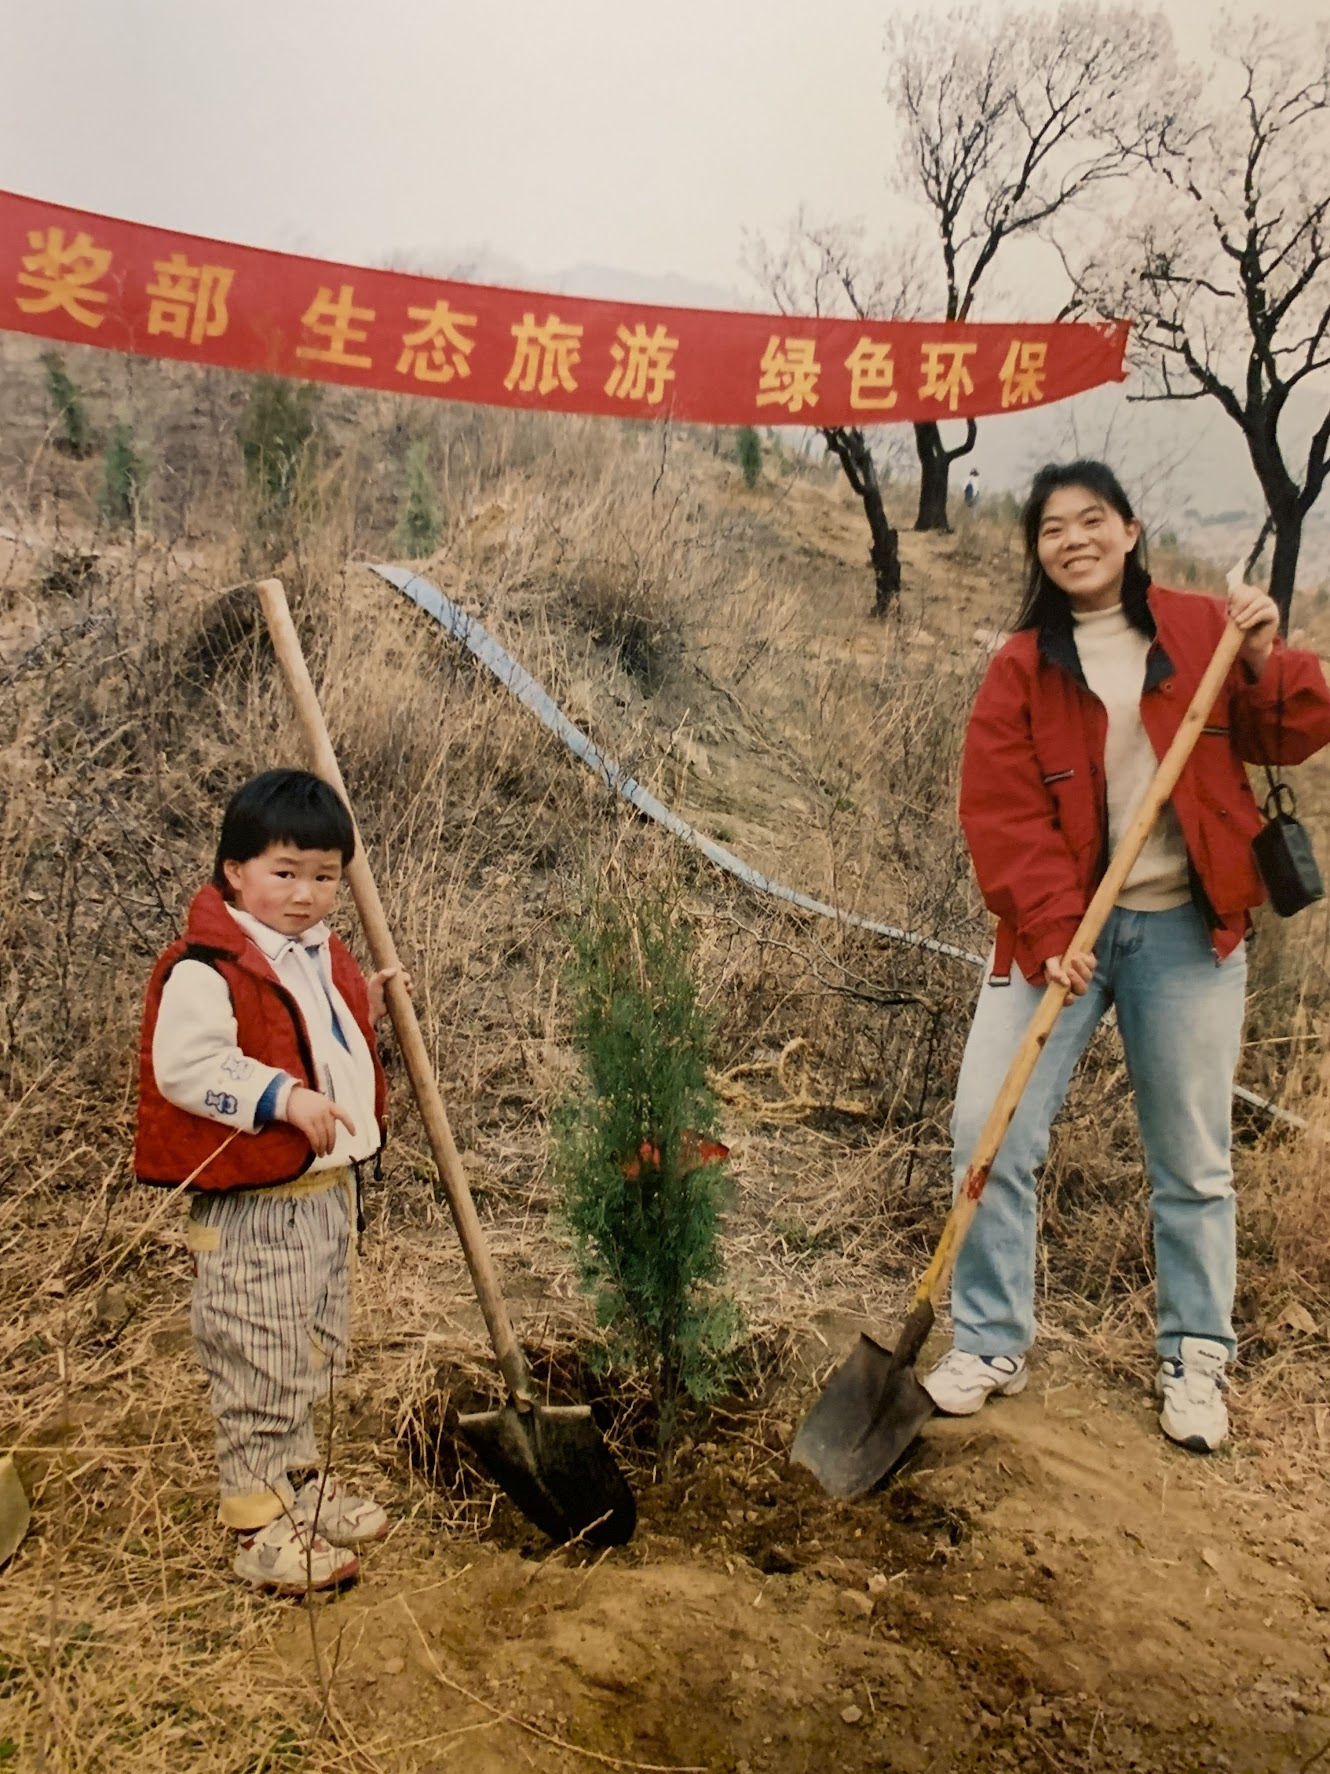 a young child and and their mother plant a tree on a hillside with a banner with Chinese characters hanging behind them